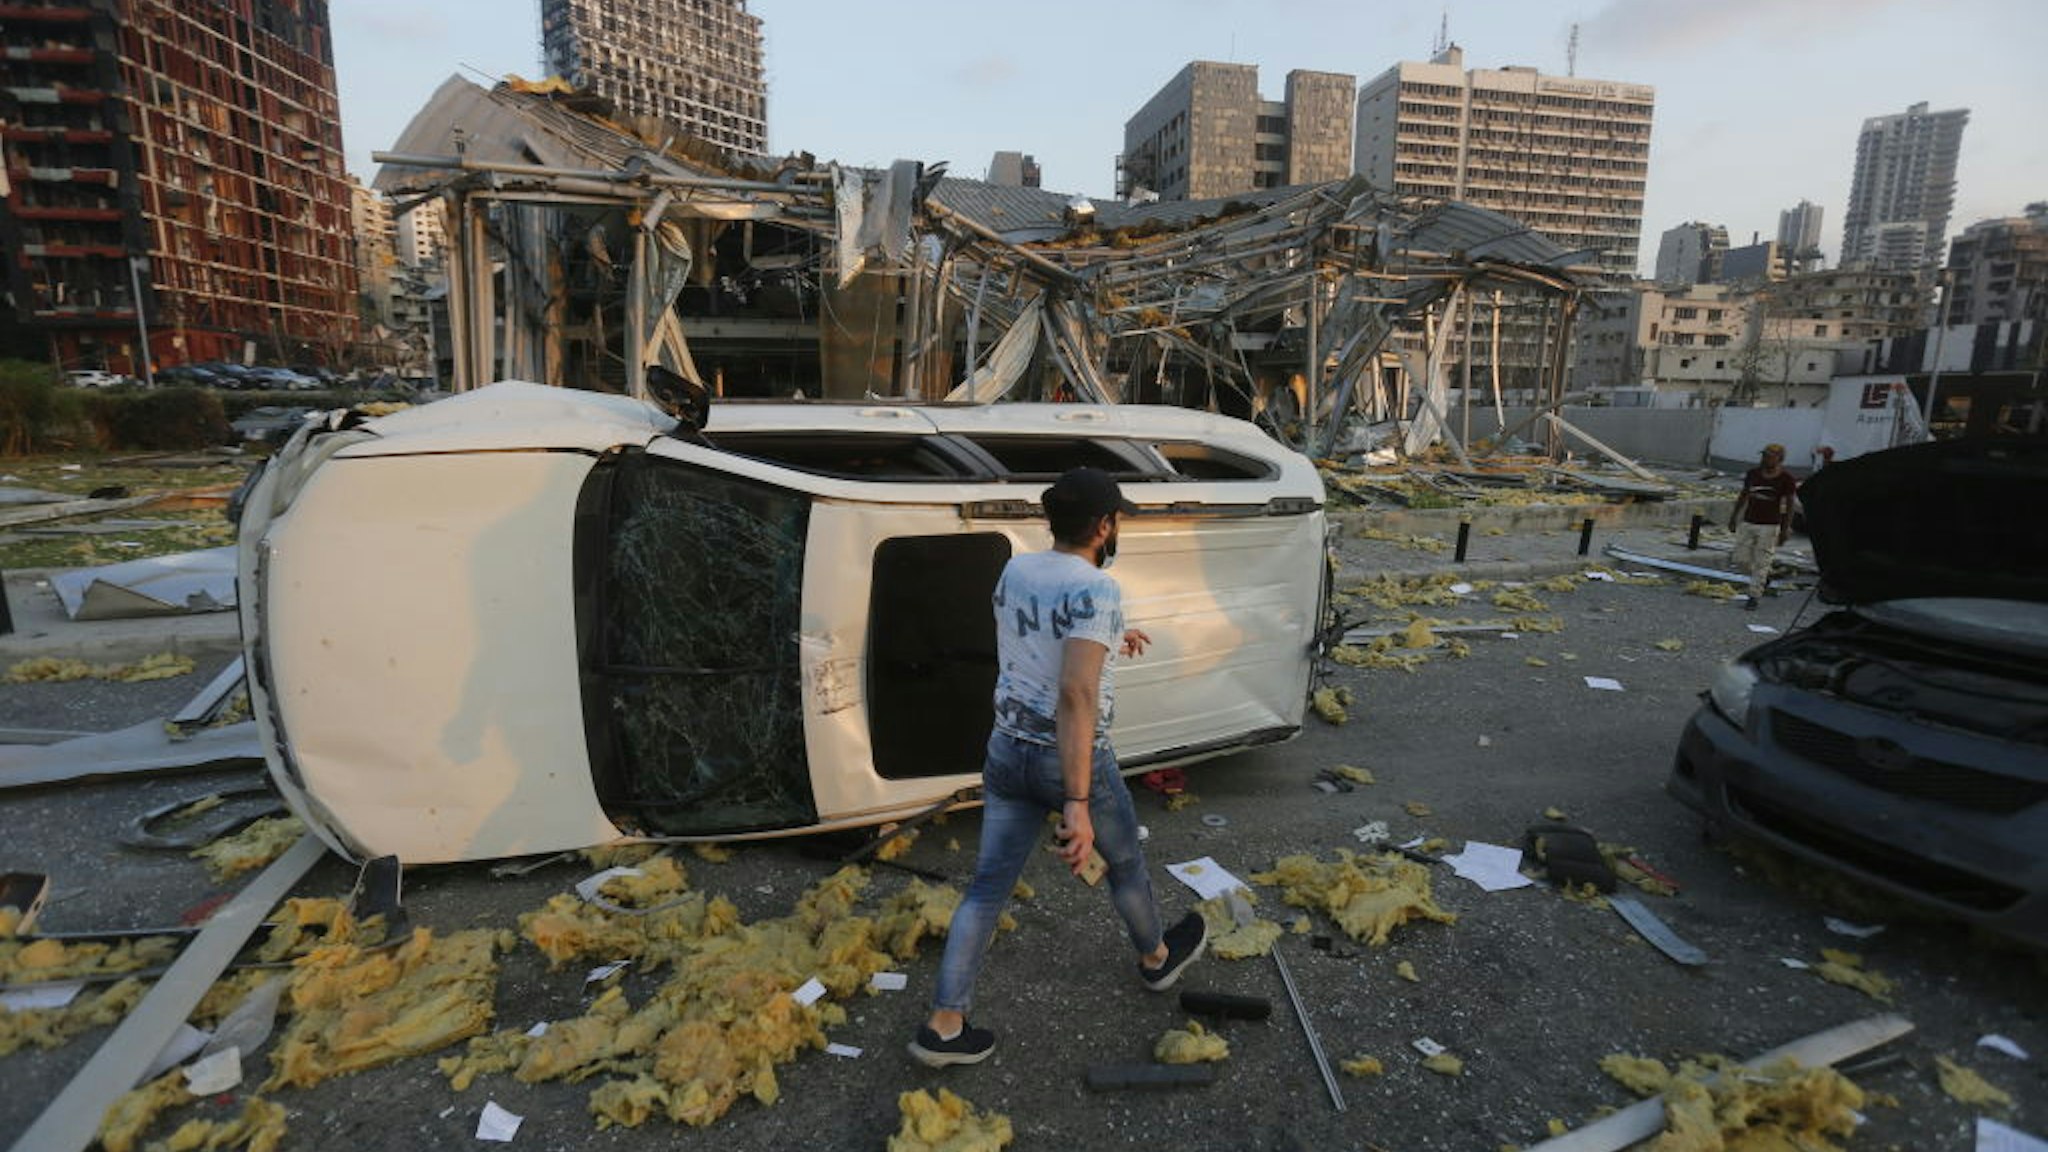 BEIRUT, LEBANON - AUGUST 04: A man walks by an overturned car and destroyed buildings on August 4, 2020 in Beirut, Lebanon. At least 50 people were killed and thousands more injured when two explosions occurred near the Lebanese capital's port area.